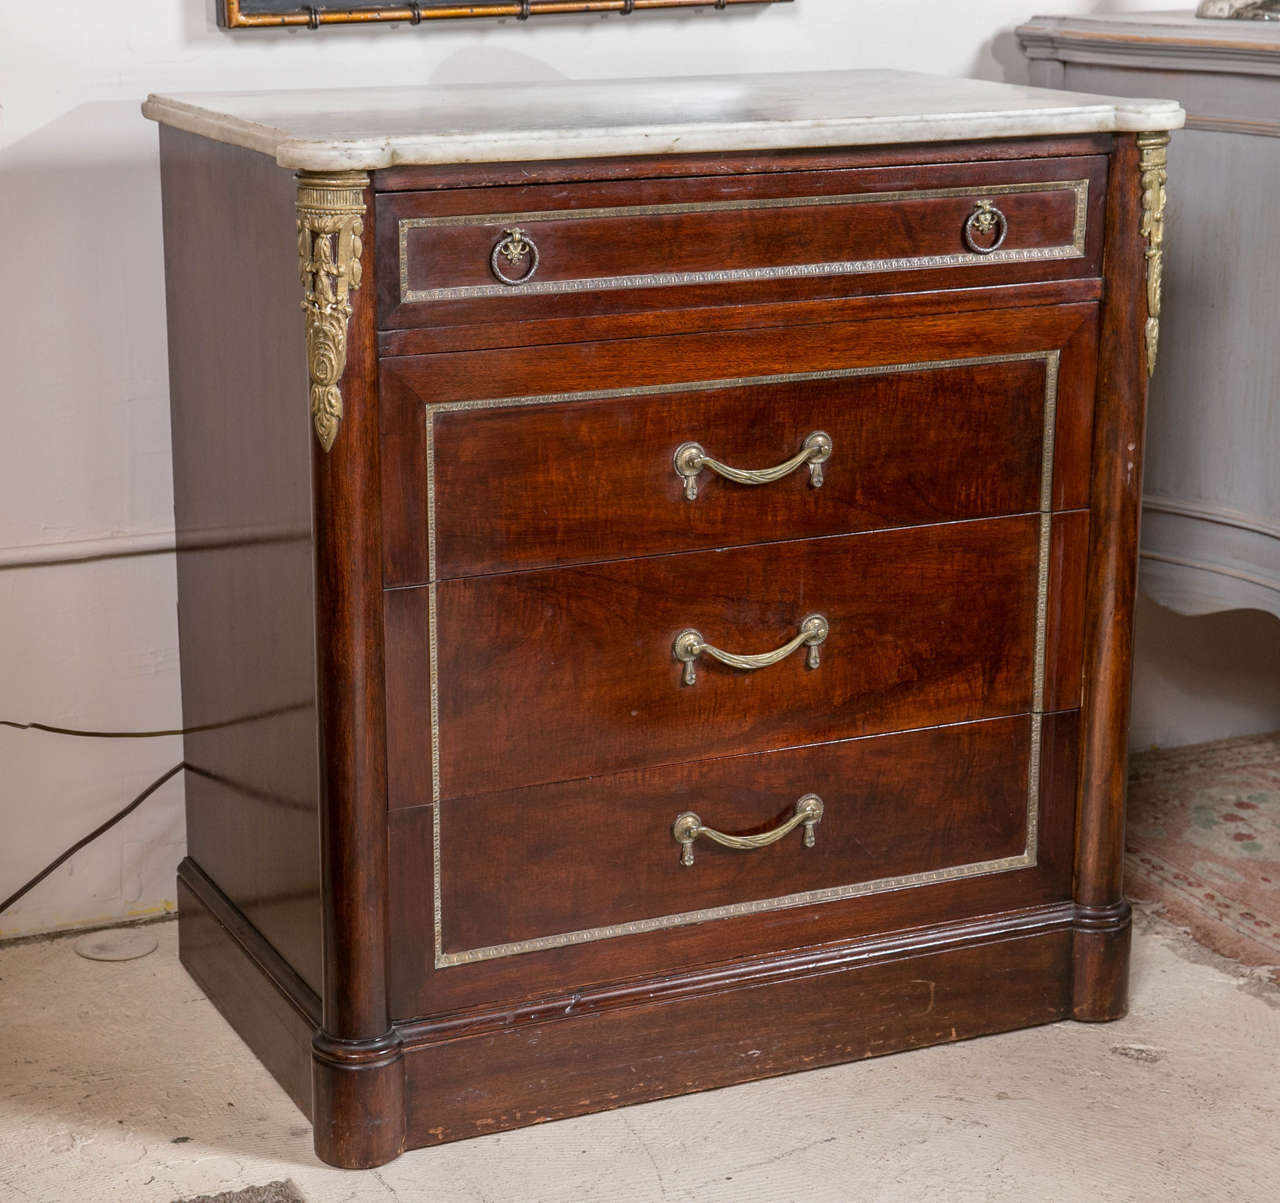 Pair of mahogany marble-top mahogany commodes. A fine pair of solid mahogany marble top commodes. Each having a central bronze framed smaller drawer over three large bronze framed drawers. The corners with finely cast bronze mounts. Fine custom